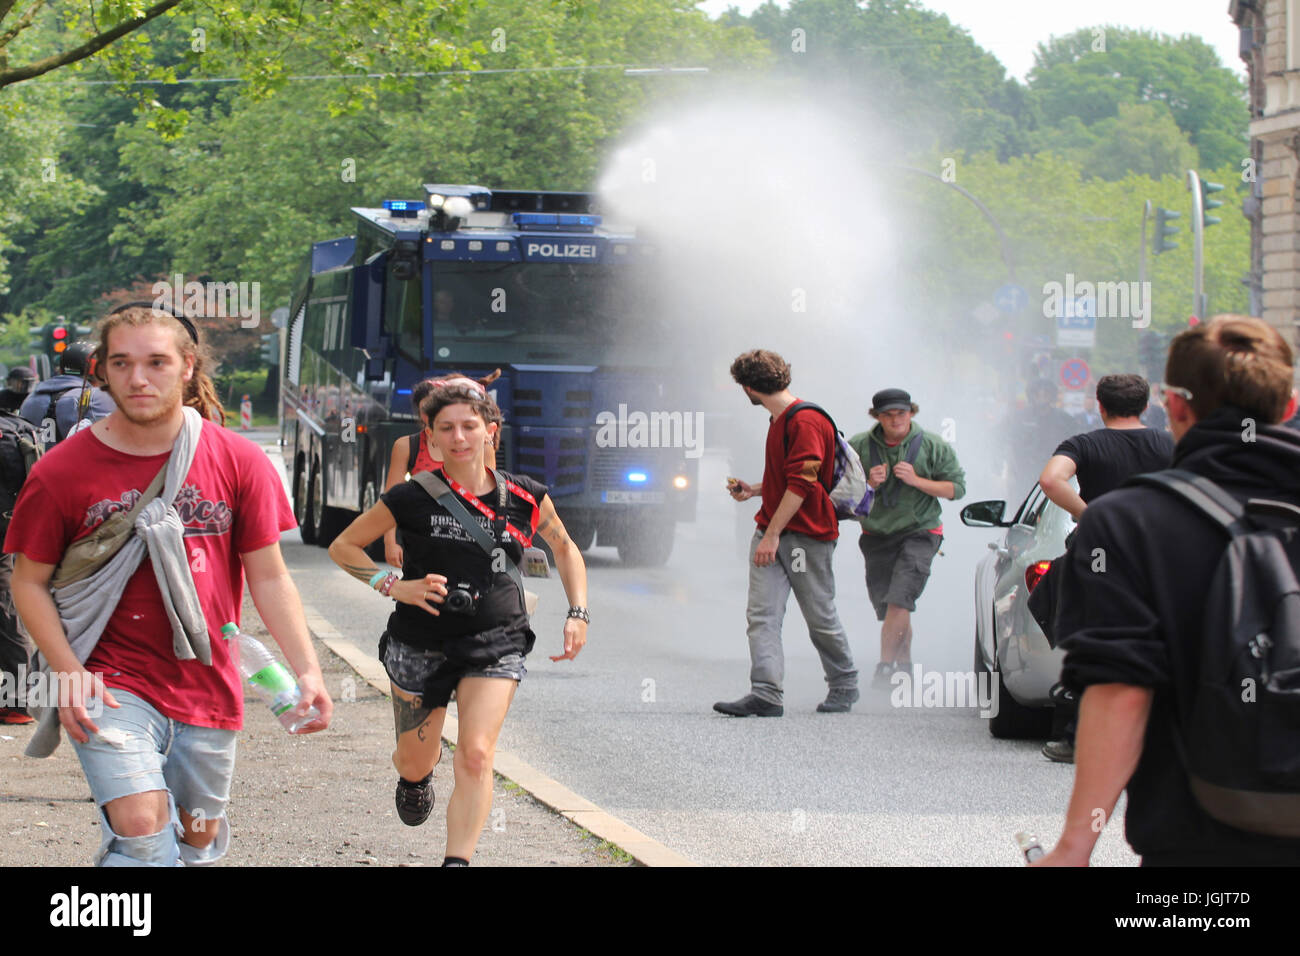 Hamburg, Germany. 07th July, 2017. G20 Summit protests in Hamburg. Protesters flee as watercannon opens fire Credit: Conall Kearney/Alamy Live News Stock Photo